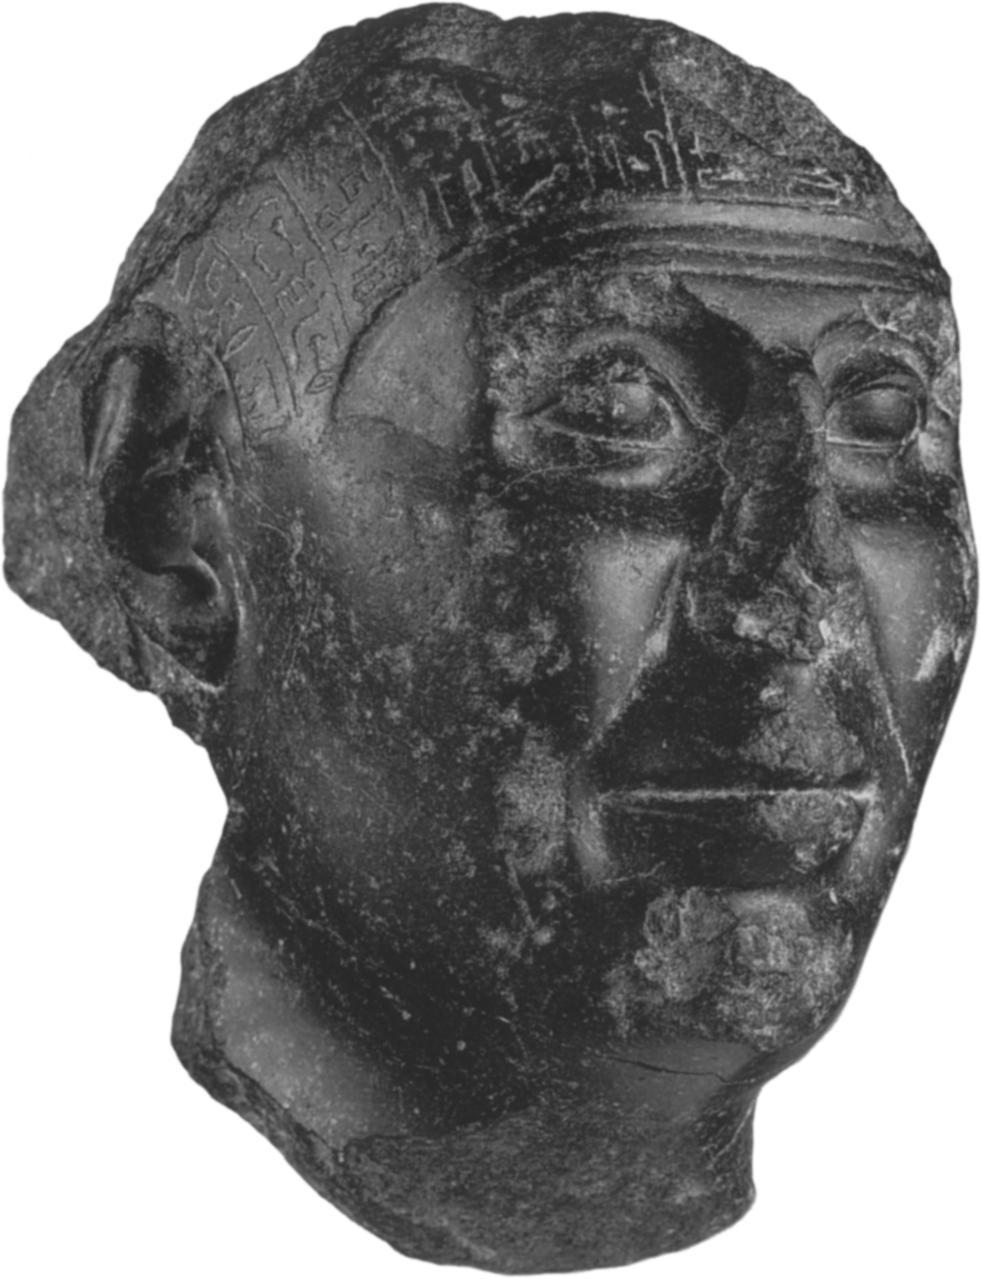 60-62, pls. 9-II This magnificent fragmentary head, previously in the Nadler collection, is about two-thirds lifesize.